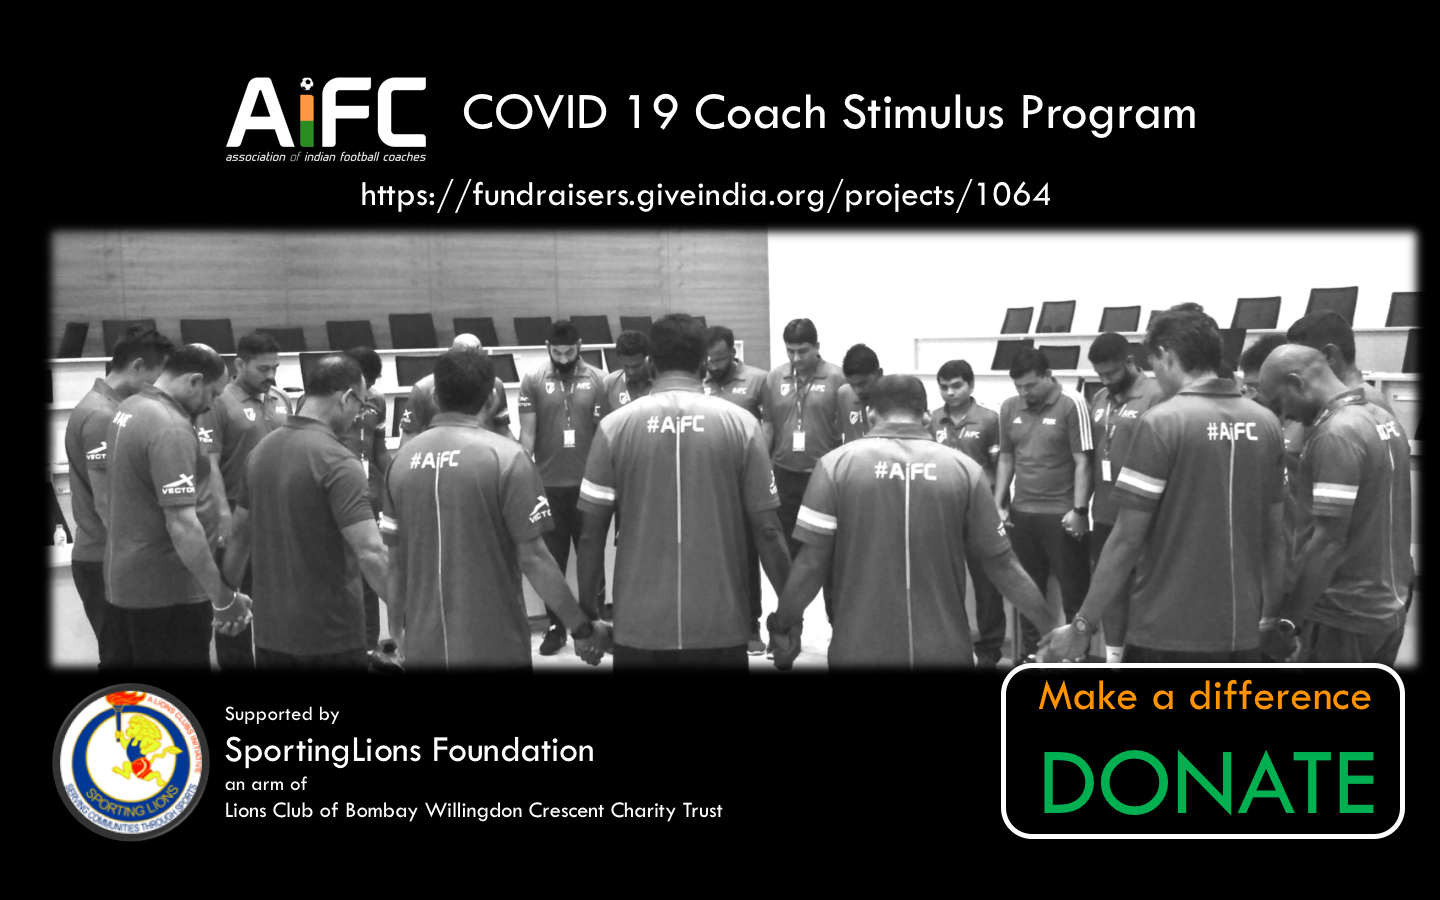 #AIFCforCoaches: Campaign to help coaches in need